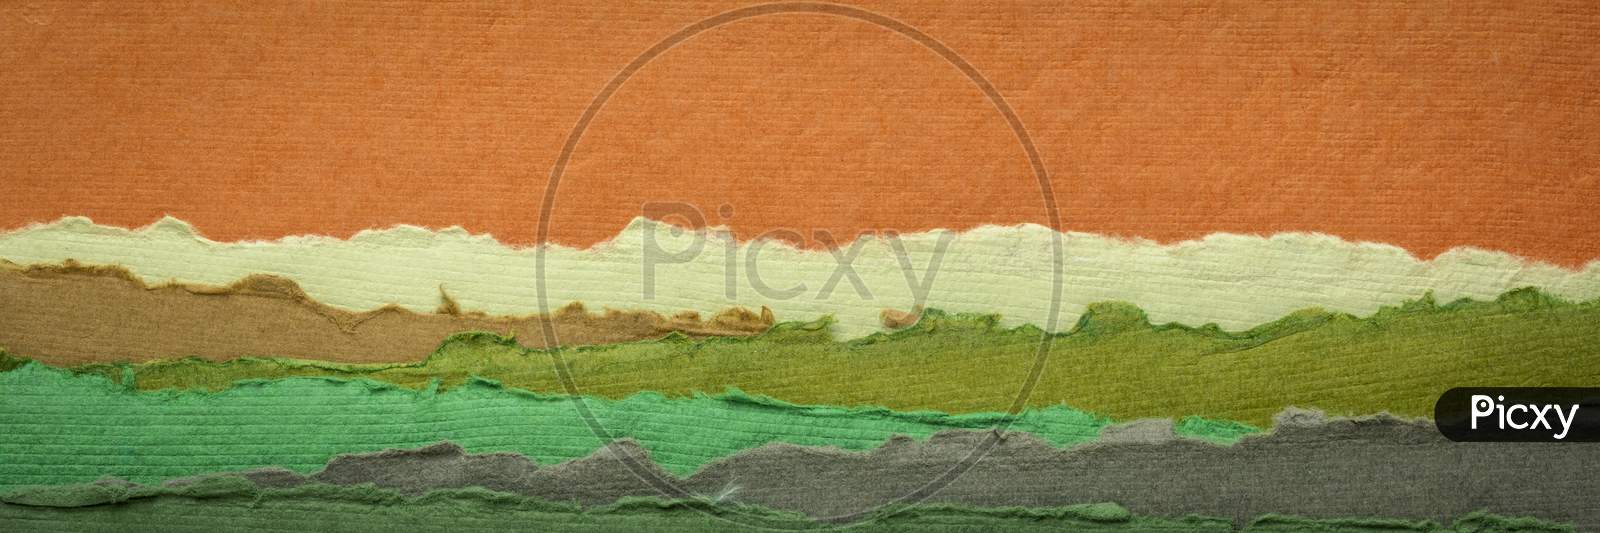 Abstract Panorama Landscape With Sunset Sky And Green Fields - A Collection Of Colorful Handmade Indian Papers Produced From Recycled Cotton Fabric